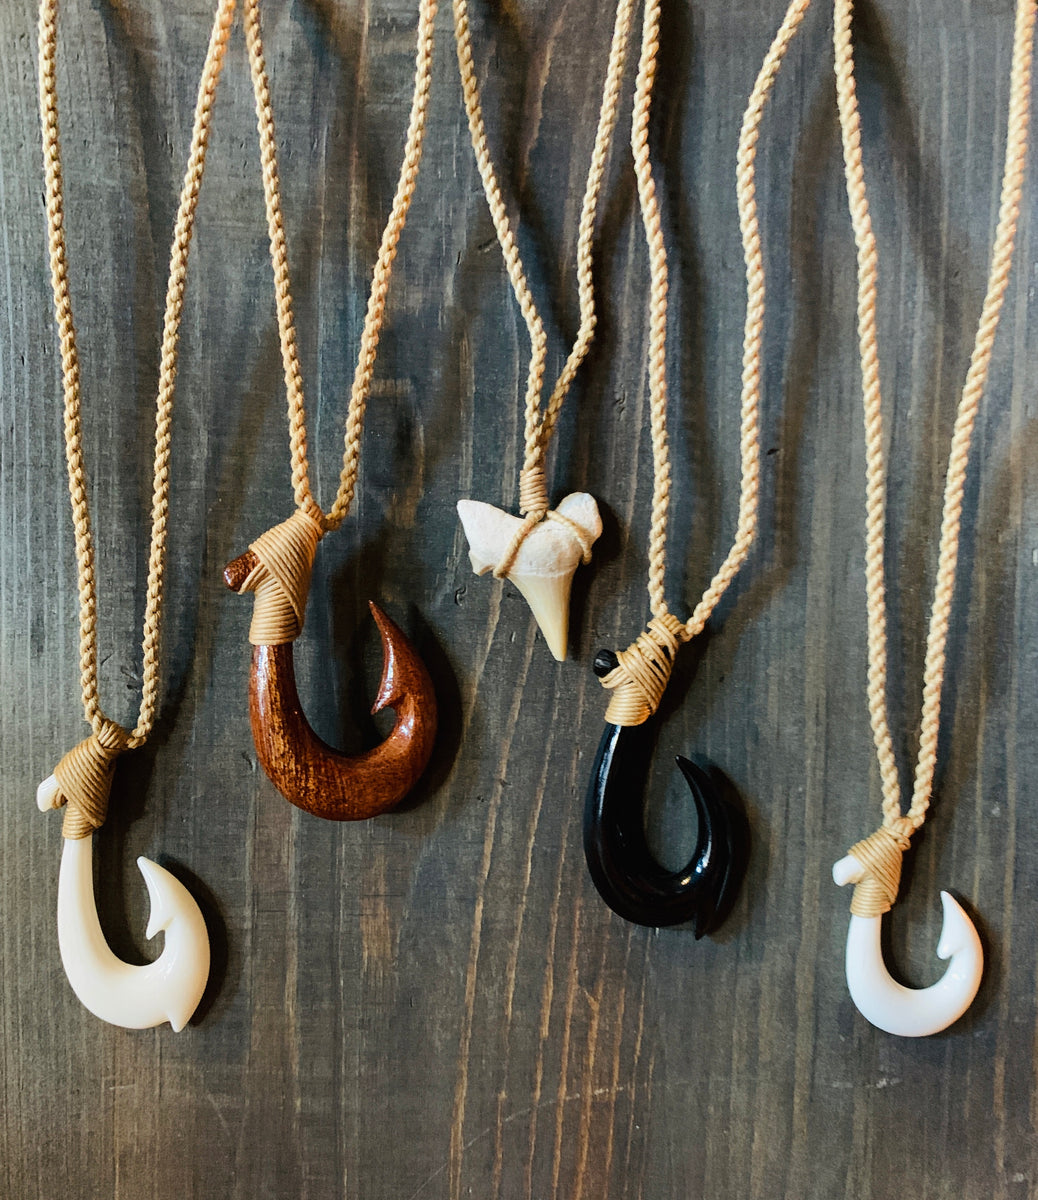 Hawaiian Jewelry: The meaning of the Fish hook Necklace